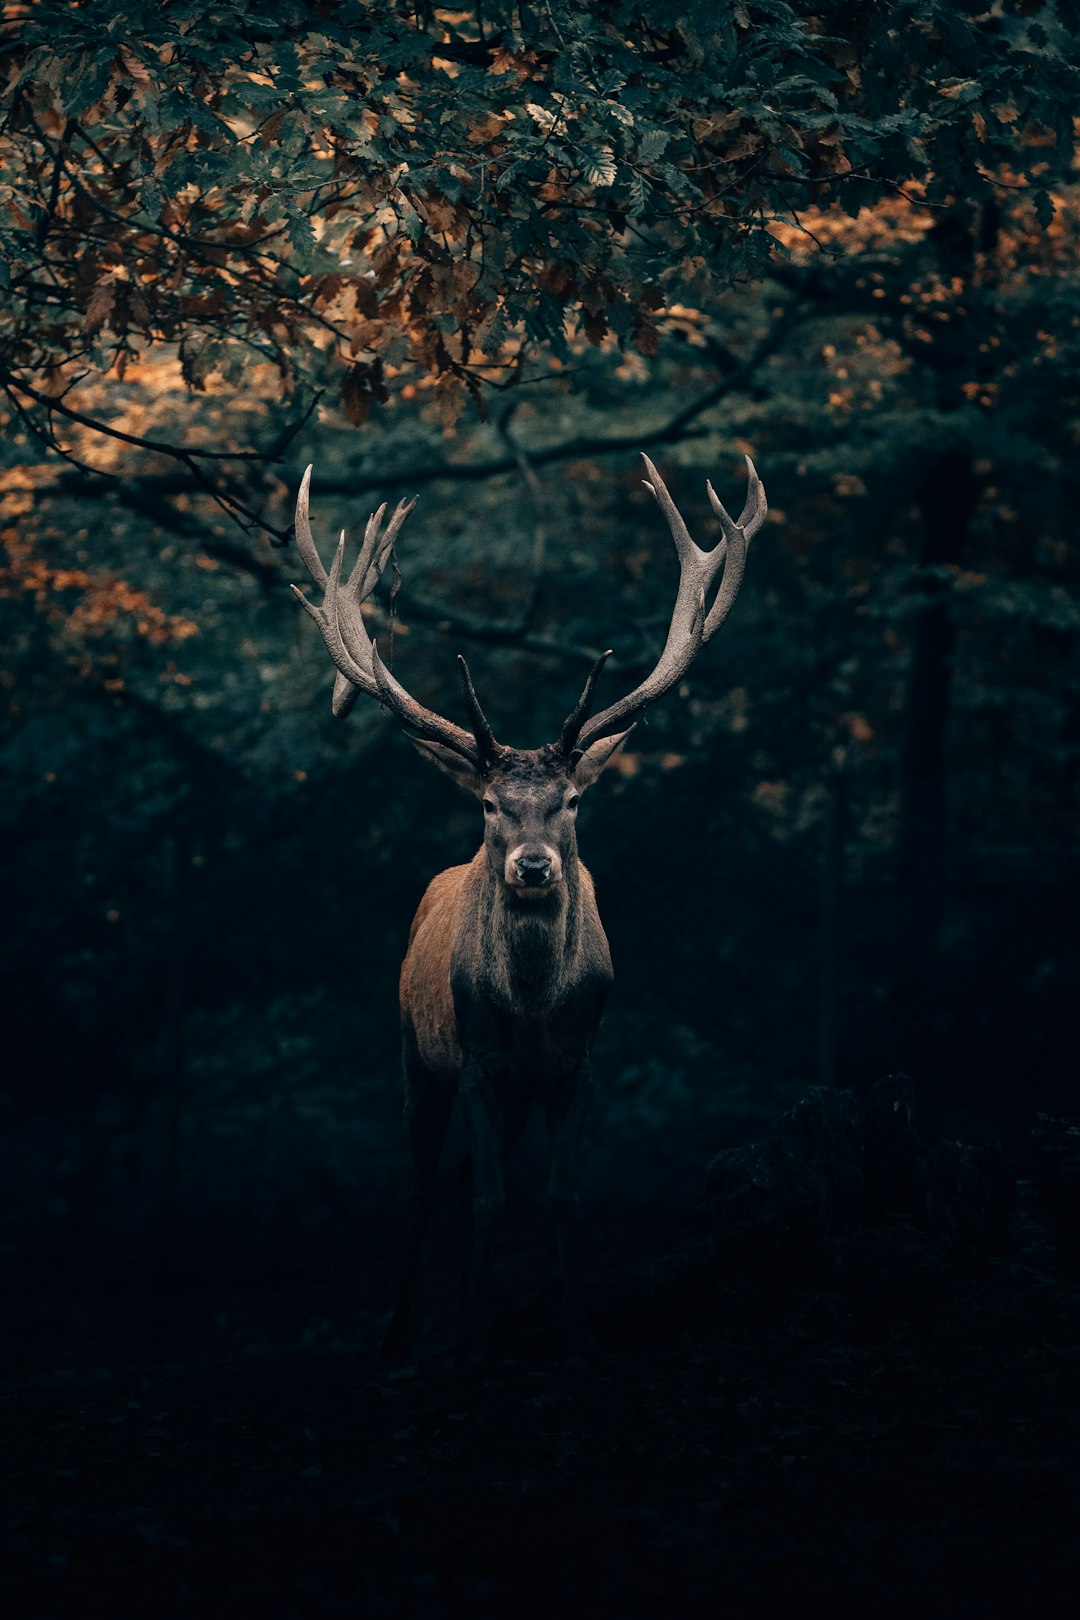 Photo of a majestic deer with impressive antlers standing in the dark forest, captured in the style of Hasselblad X2D camera for its vivid colors and sharp details.